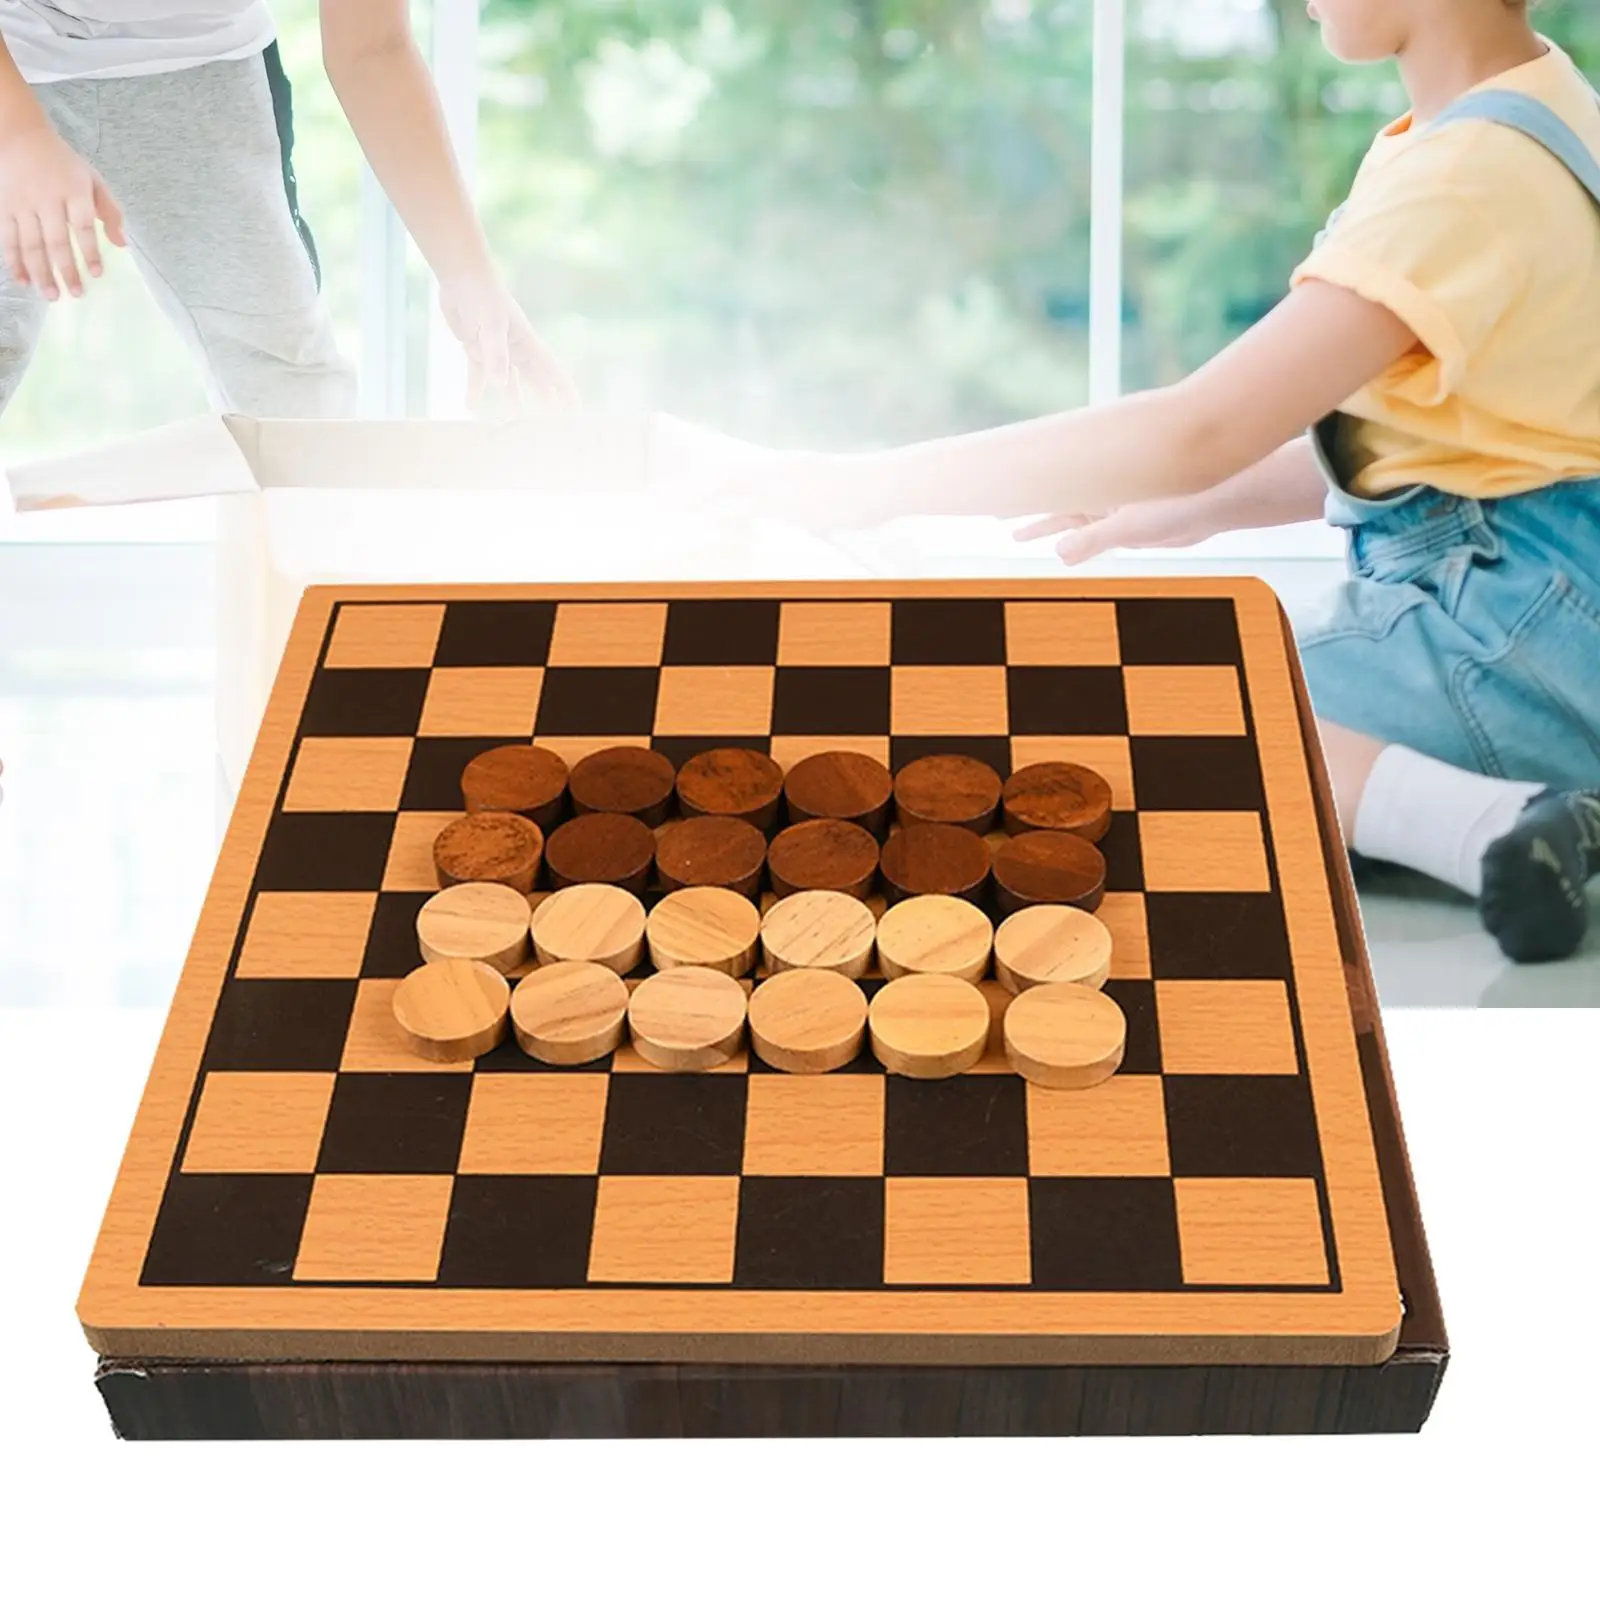 International Chess Game Set Chess Board Playing Toys Early Education Toys Craft for Centerpieces Travel Desktop